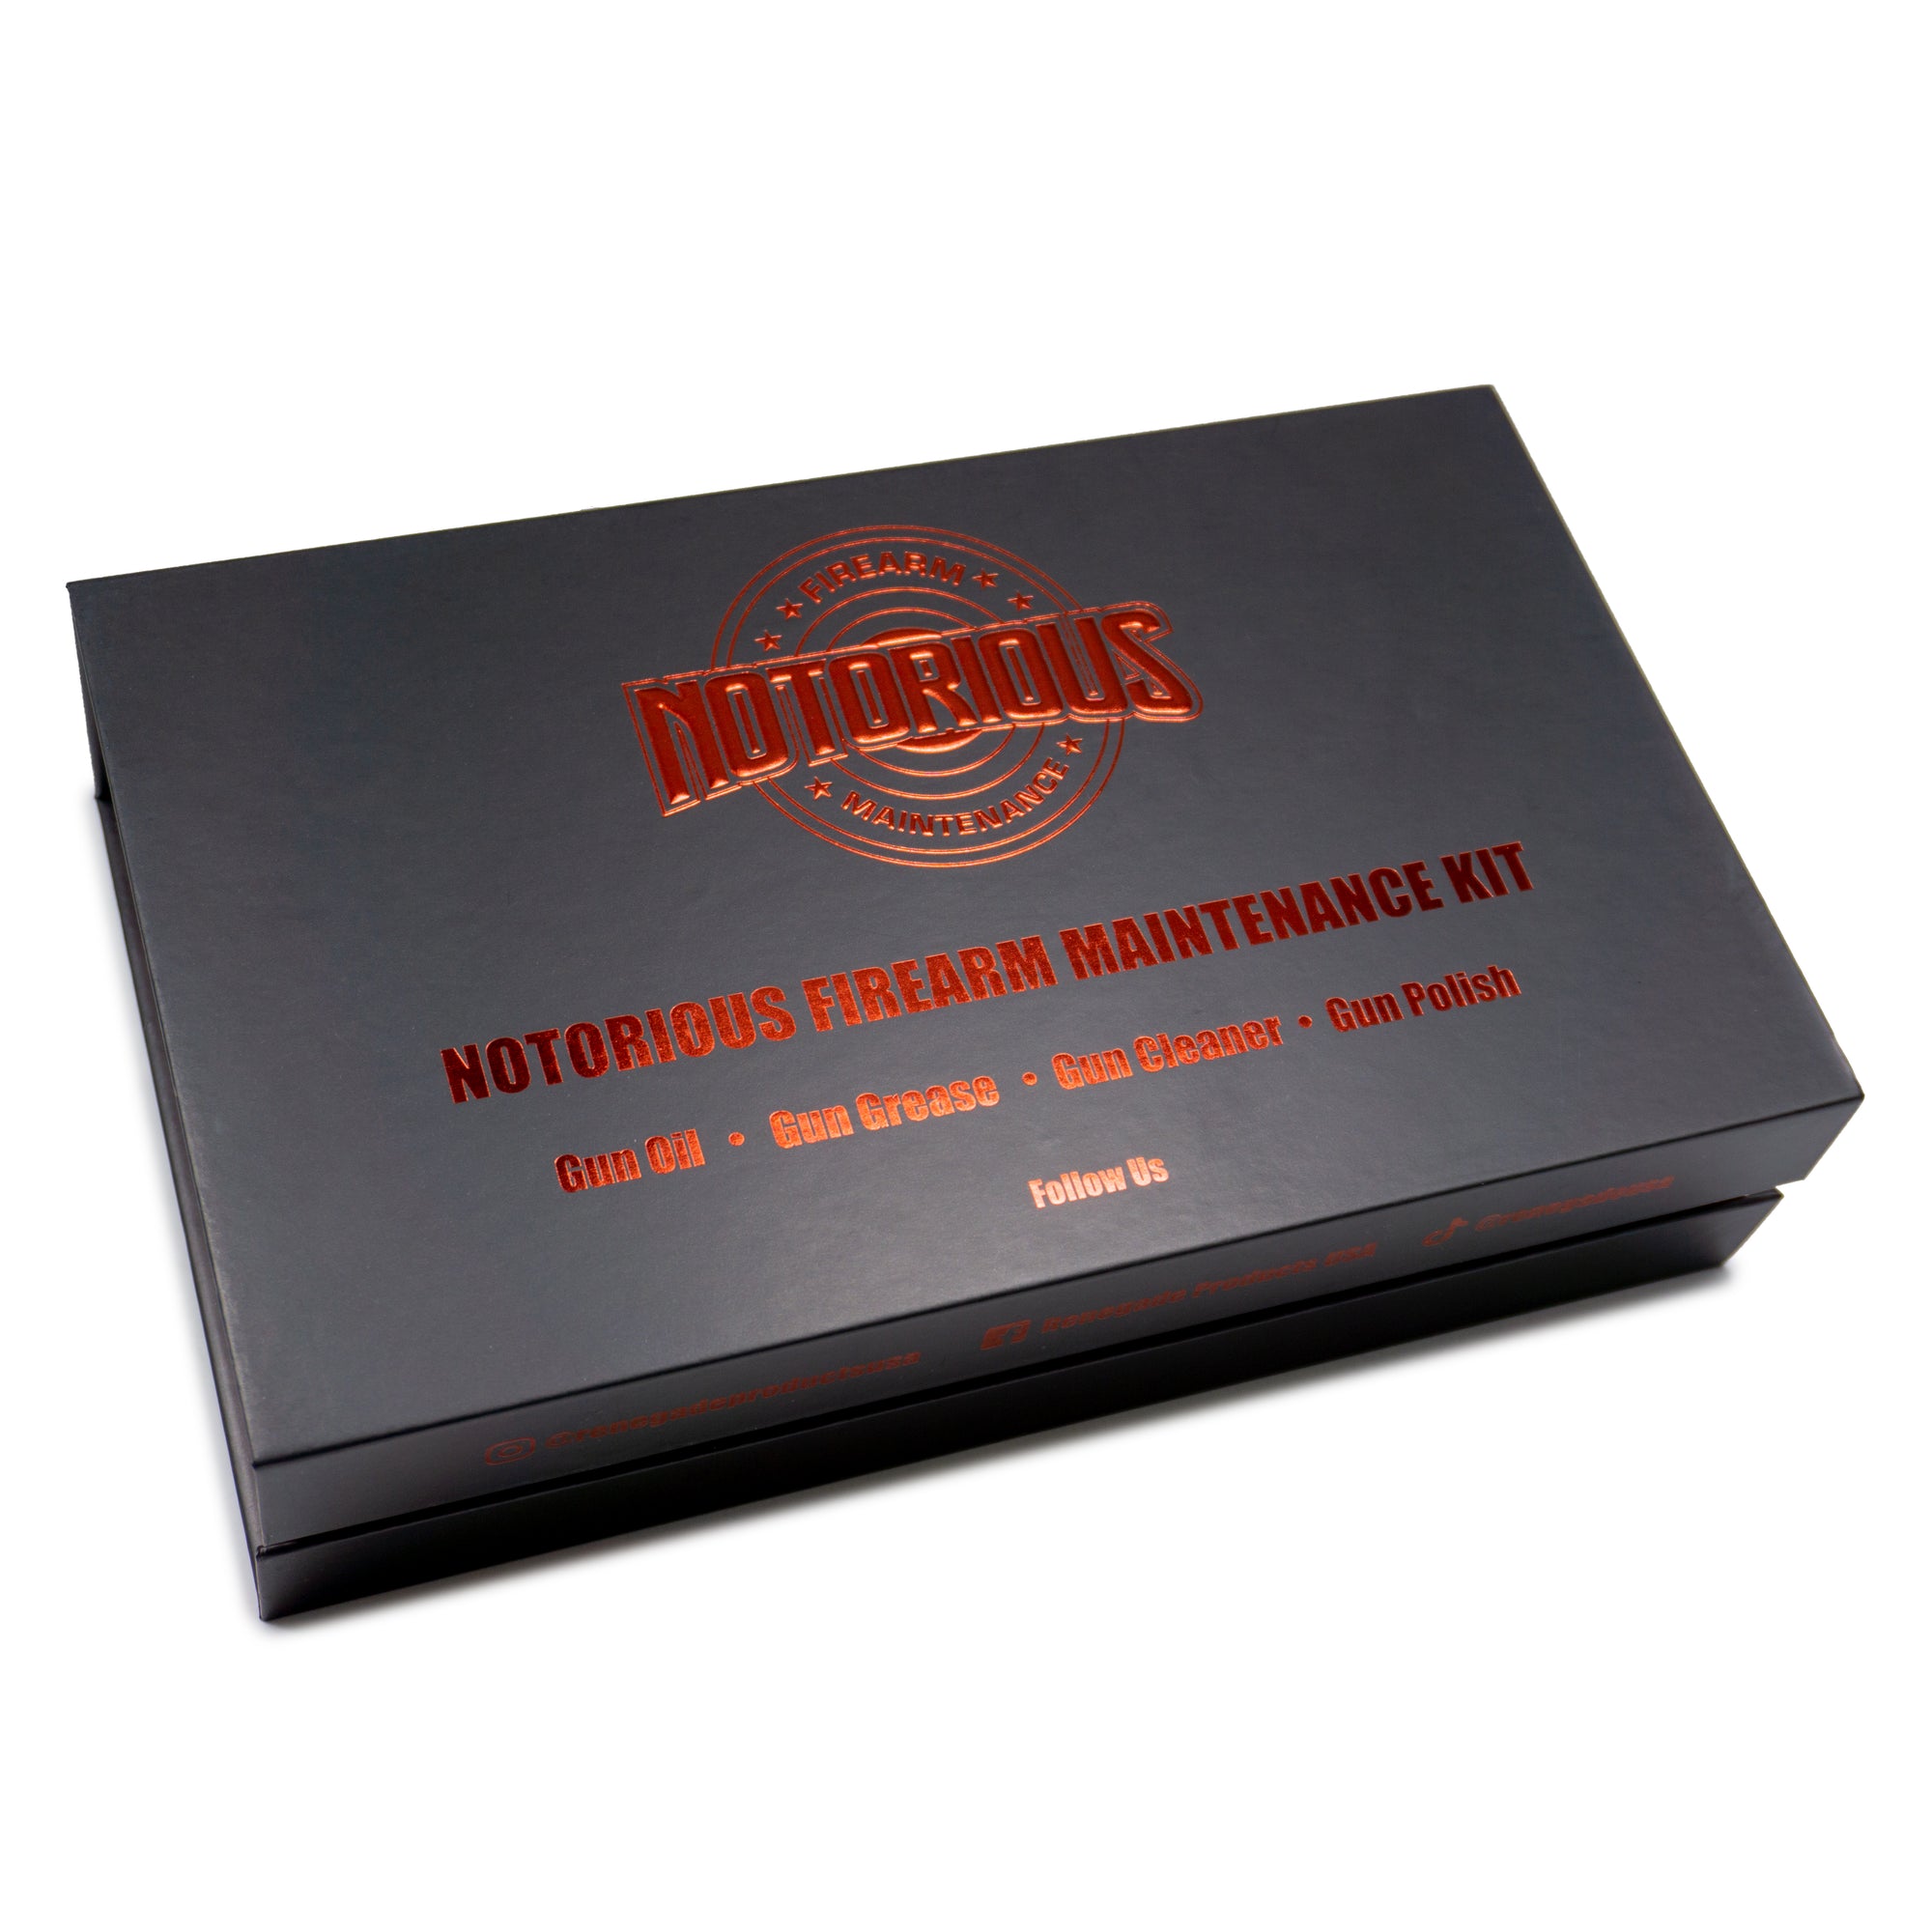 Renegade Products Notorious Firearm Maintenance Kit View of Boxed Packaging